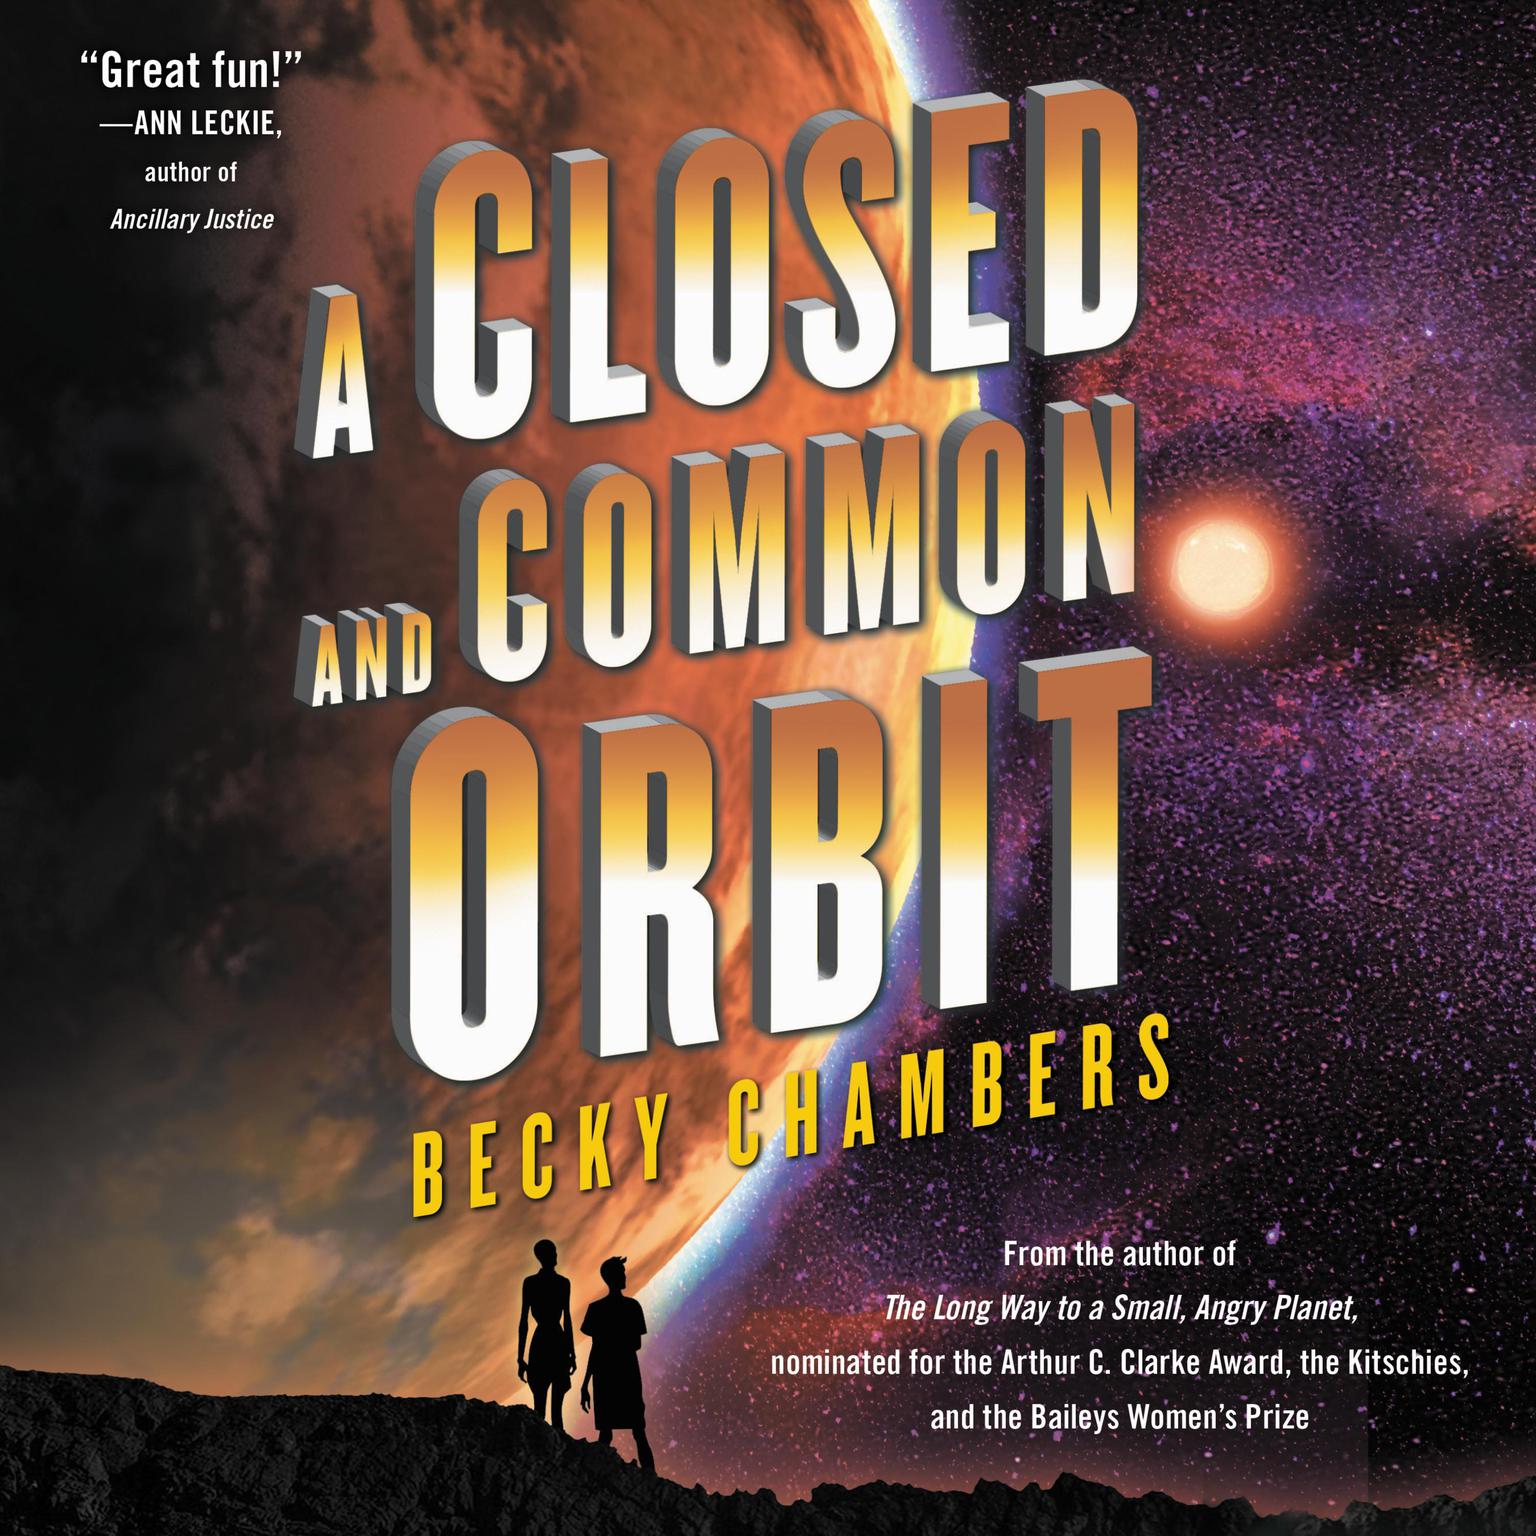 Becky Chambers, Rachel Dulude: A Closed and Common Orbit (AudiobookFormat, 2017, Tantor Audio)